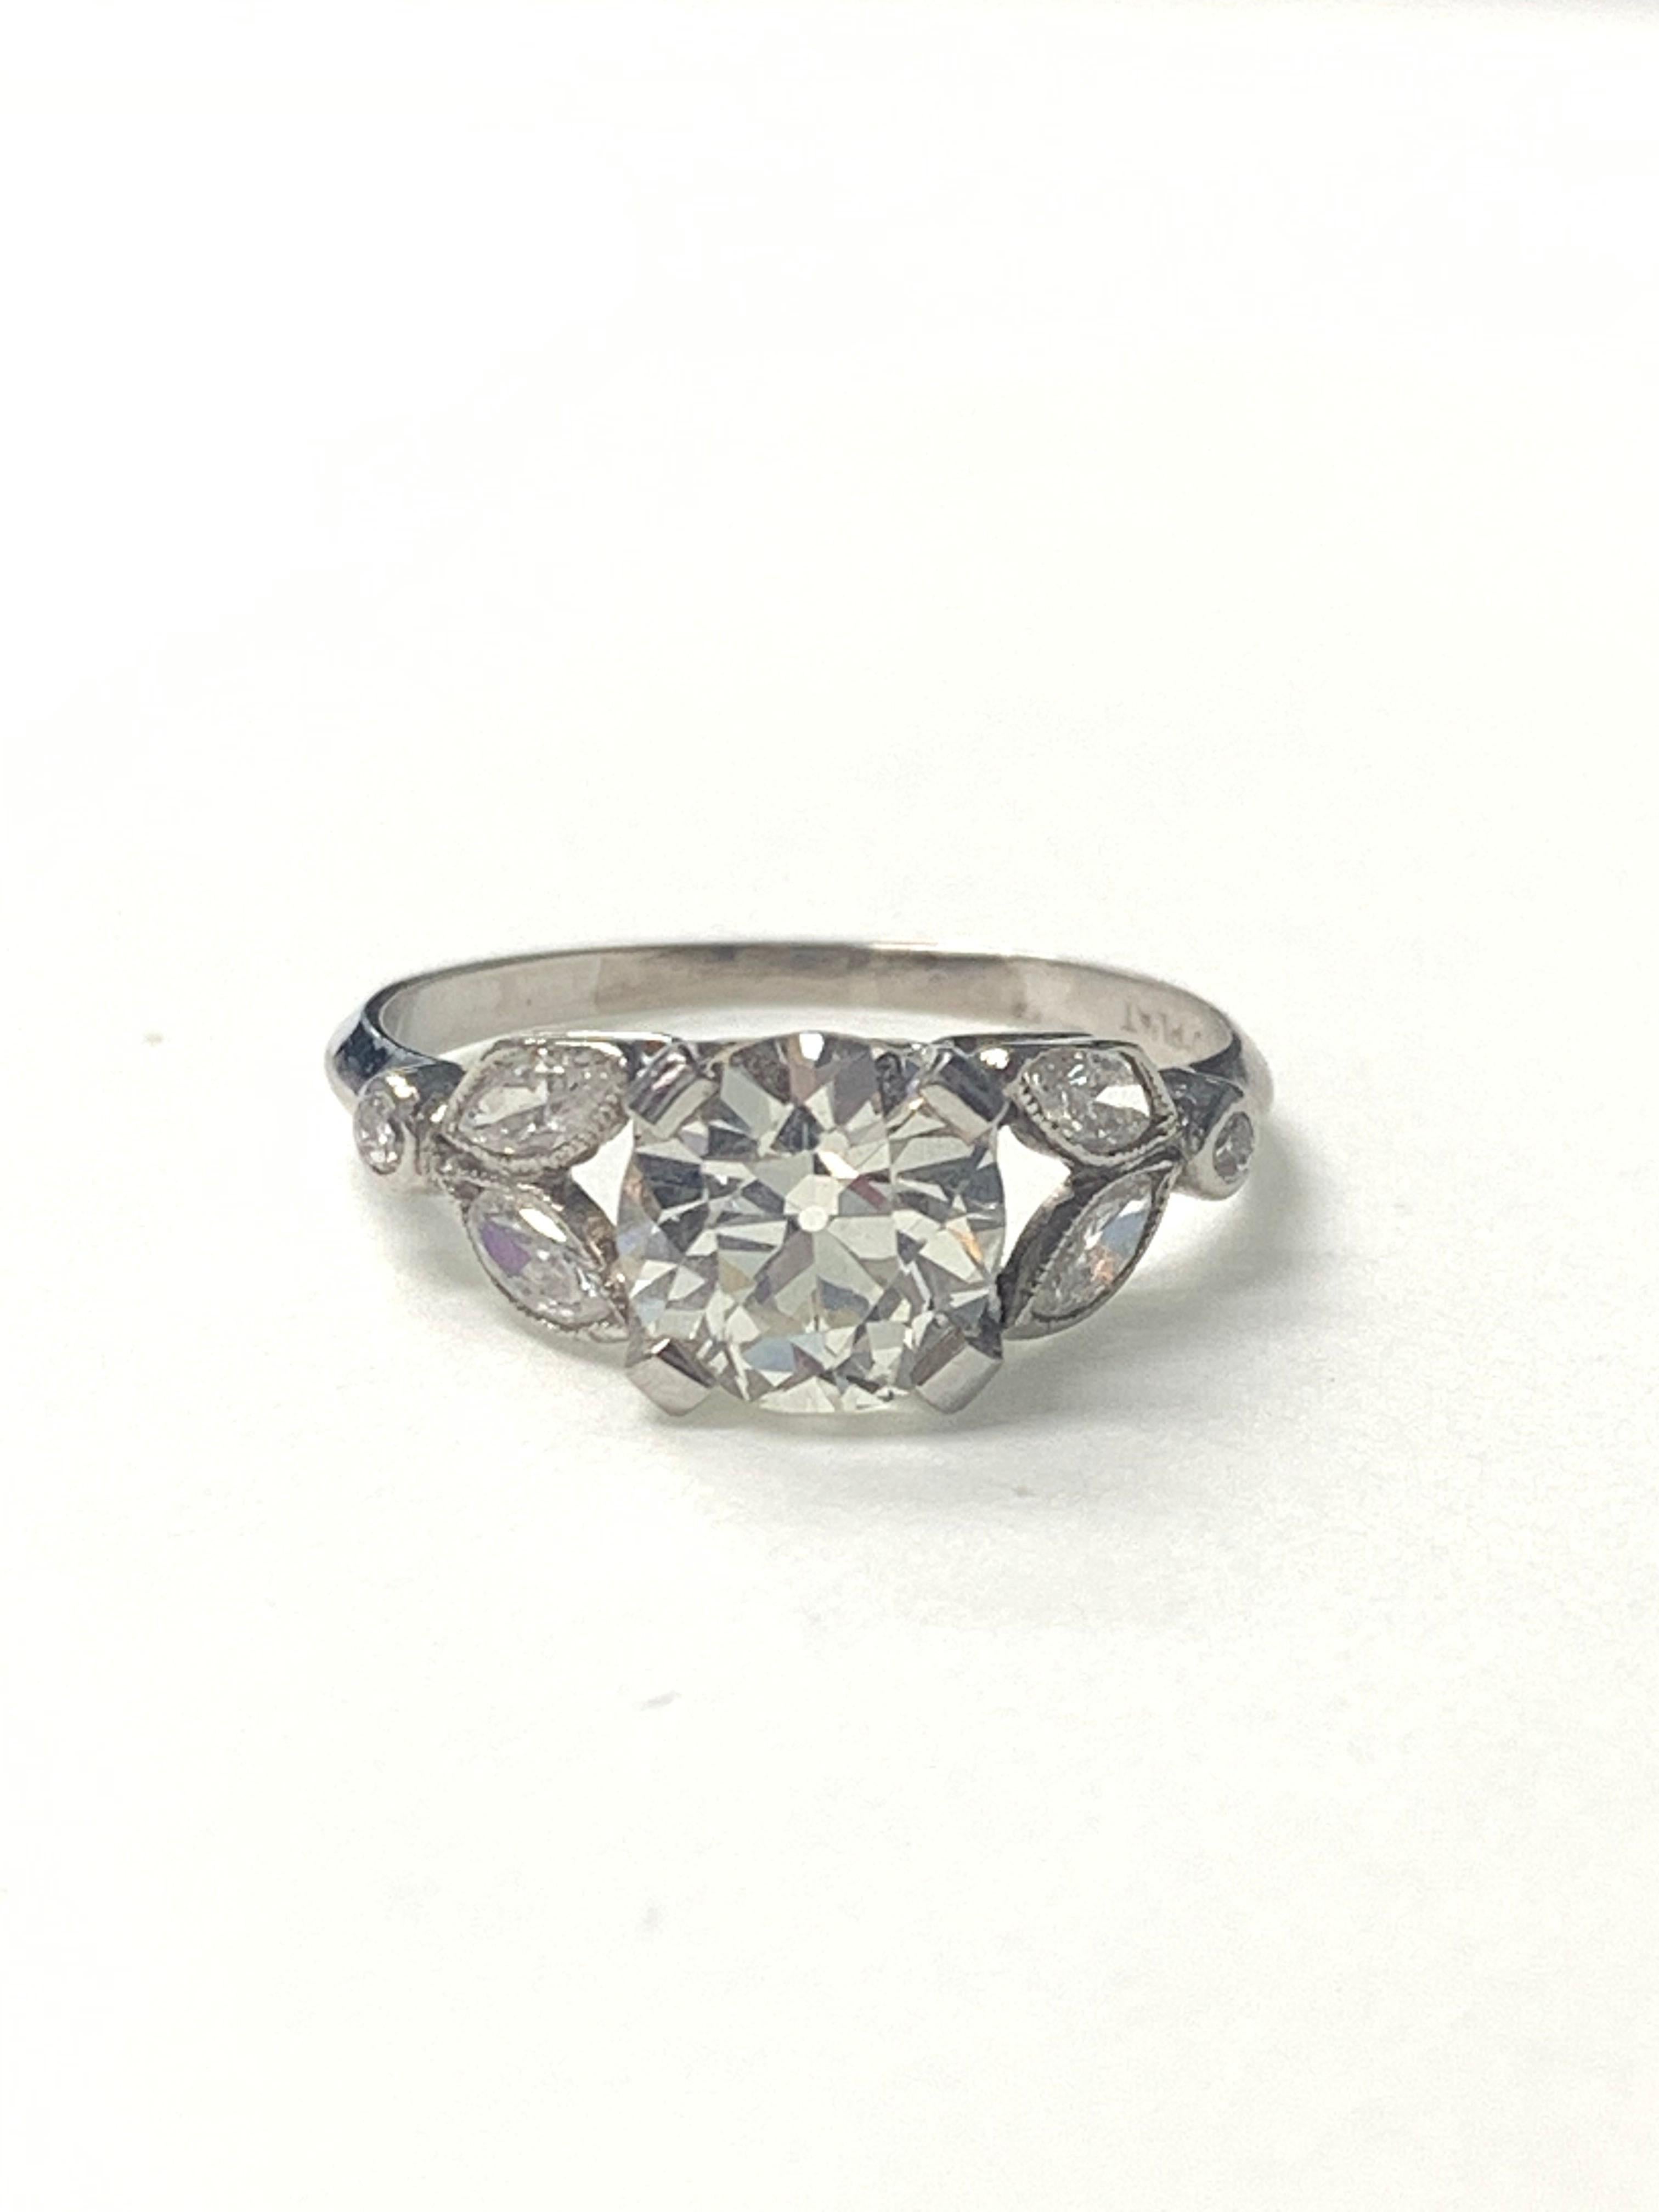 1920 Antique old european cut diamond ring in platinum. 
The details are as follows : 
Diamond weight : 1.60 carat ( H color and VS2 clarity ) 
Diamond weight : 0.50 carat ( small diamonds ) ( GH color and VS clarity) 
Metal : Platinum 
Ring : 6 